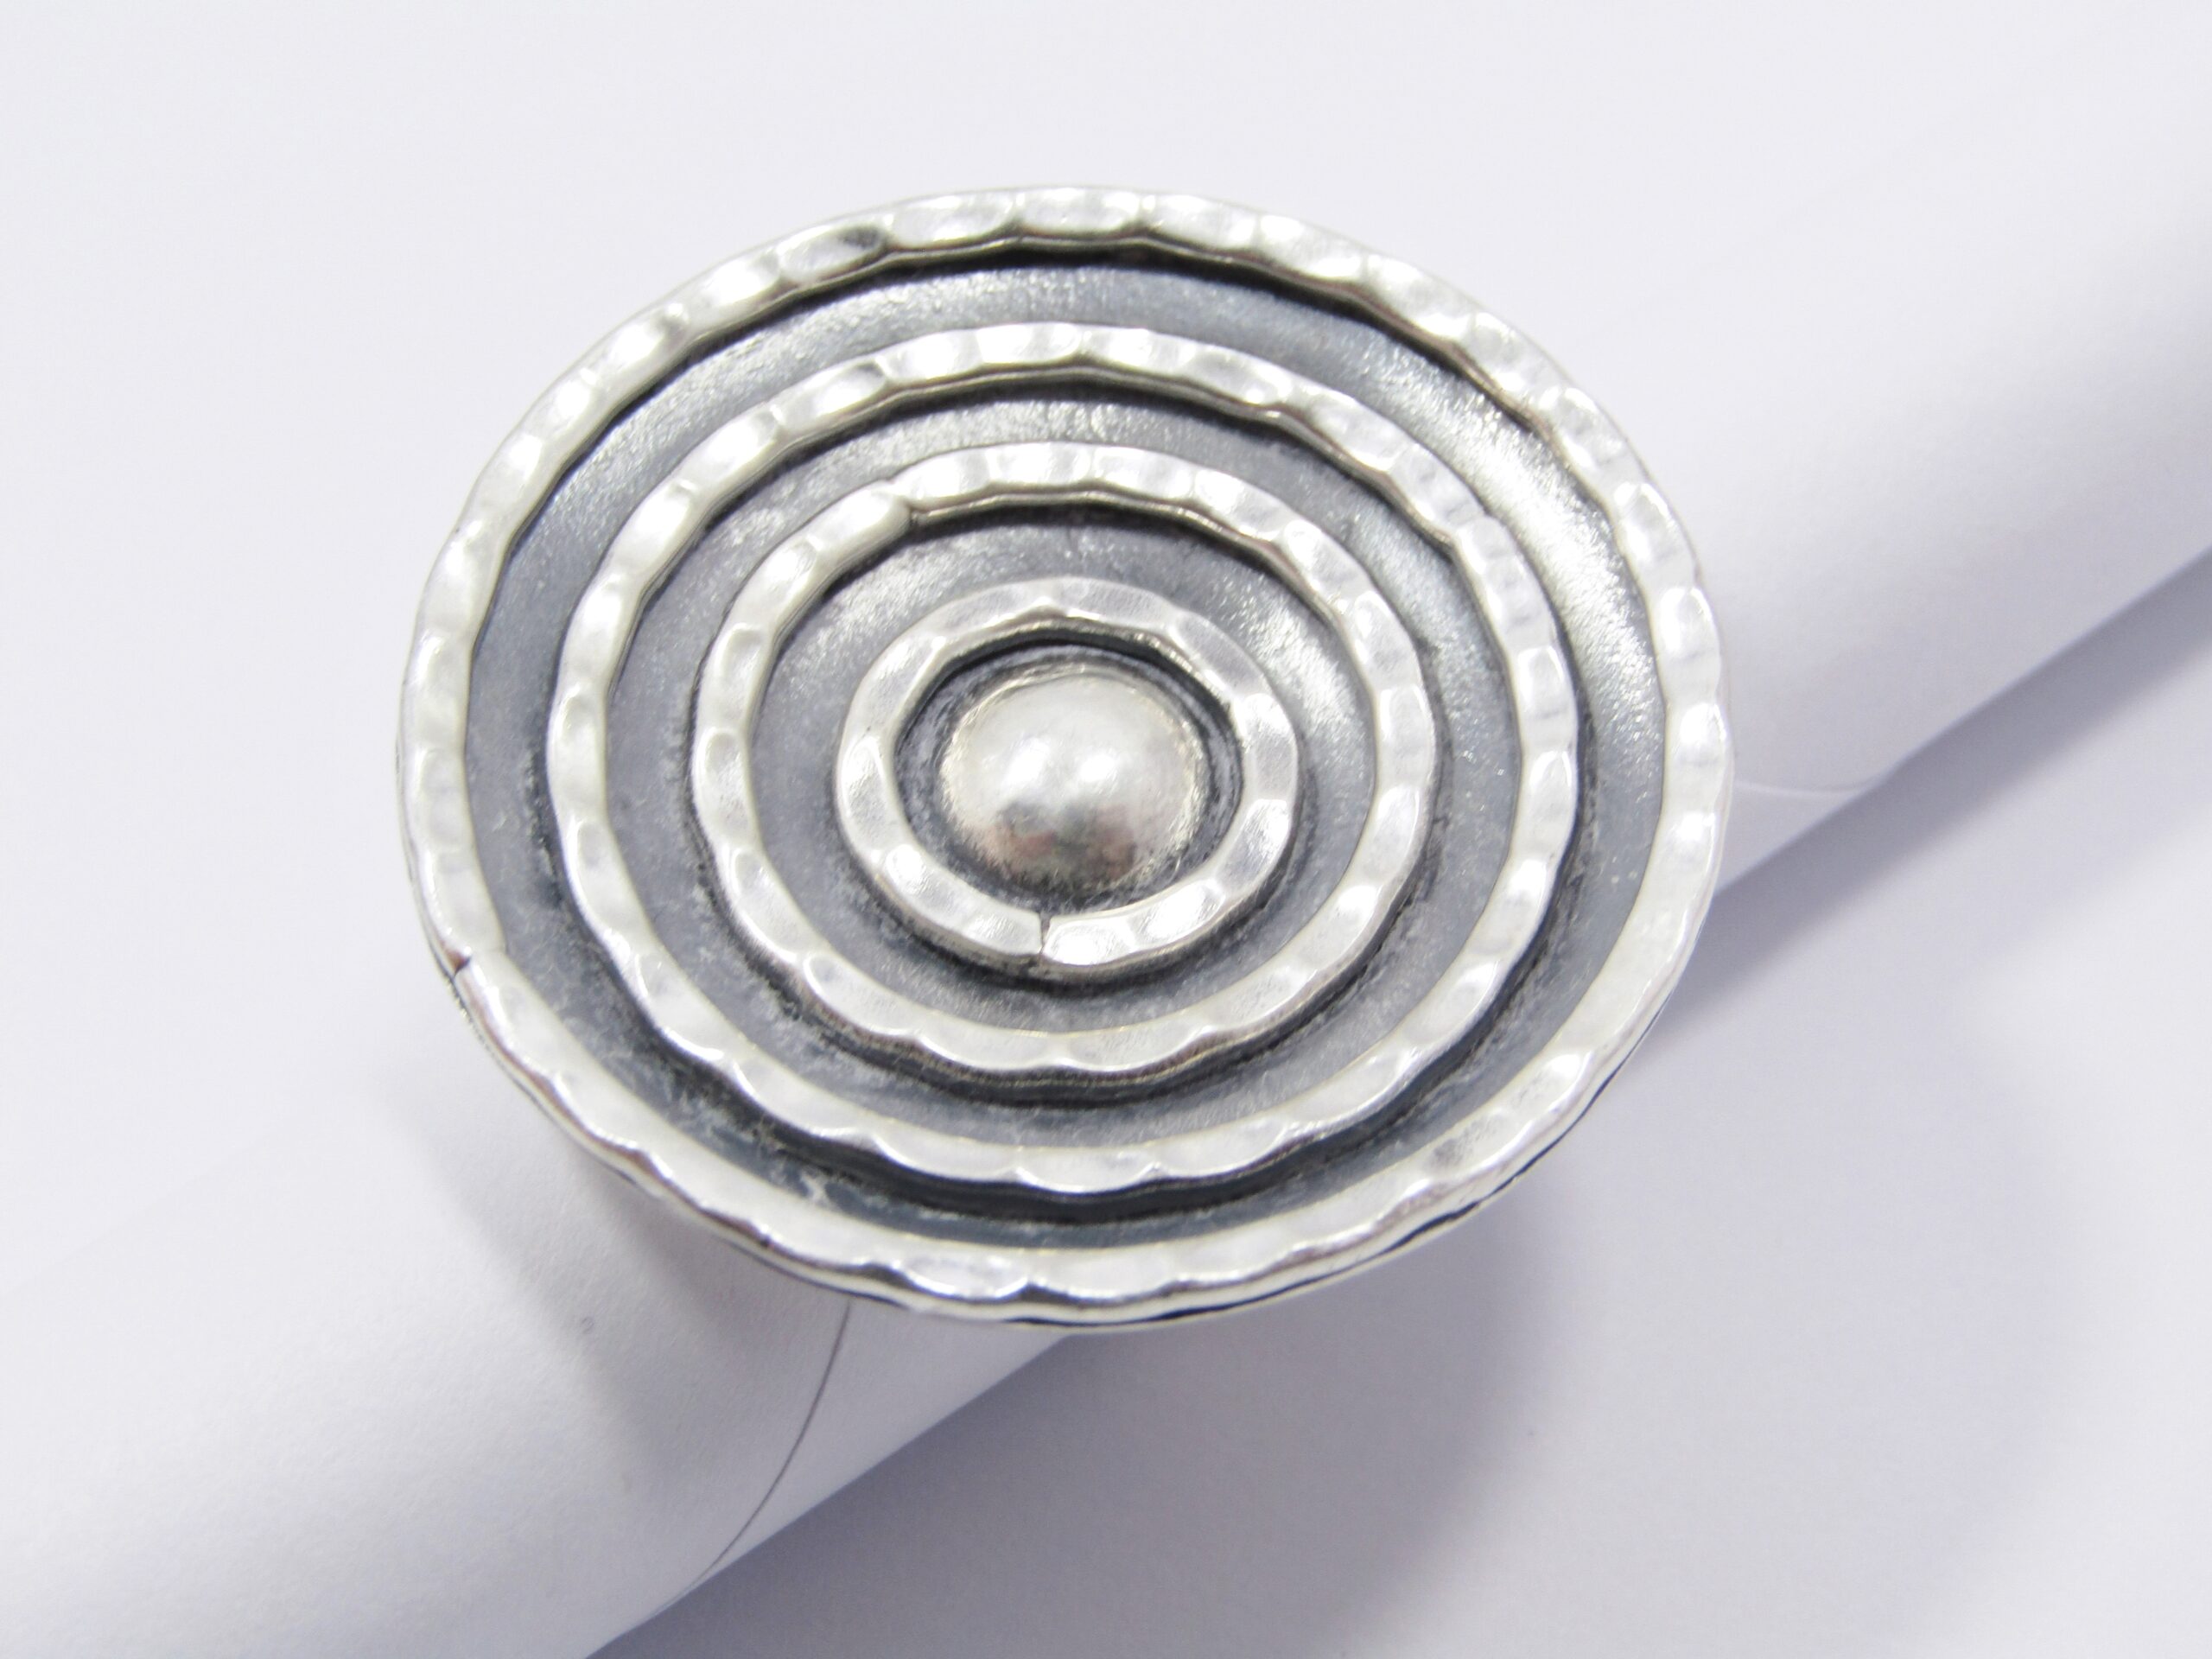 A Stunning Large Round Textured Ring with a Open-ended Band In Sterling Silver.